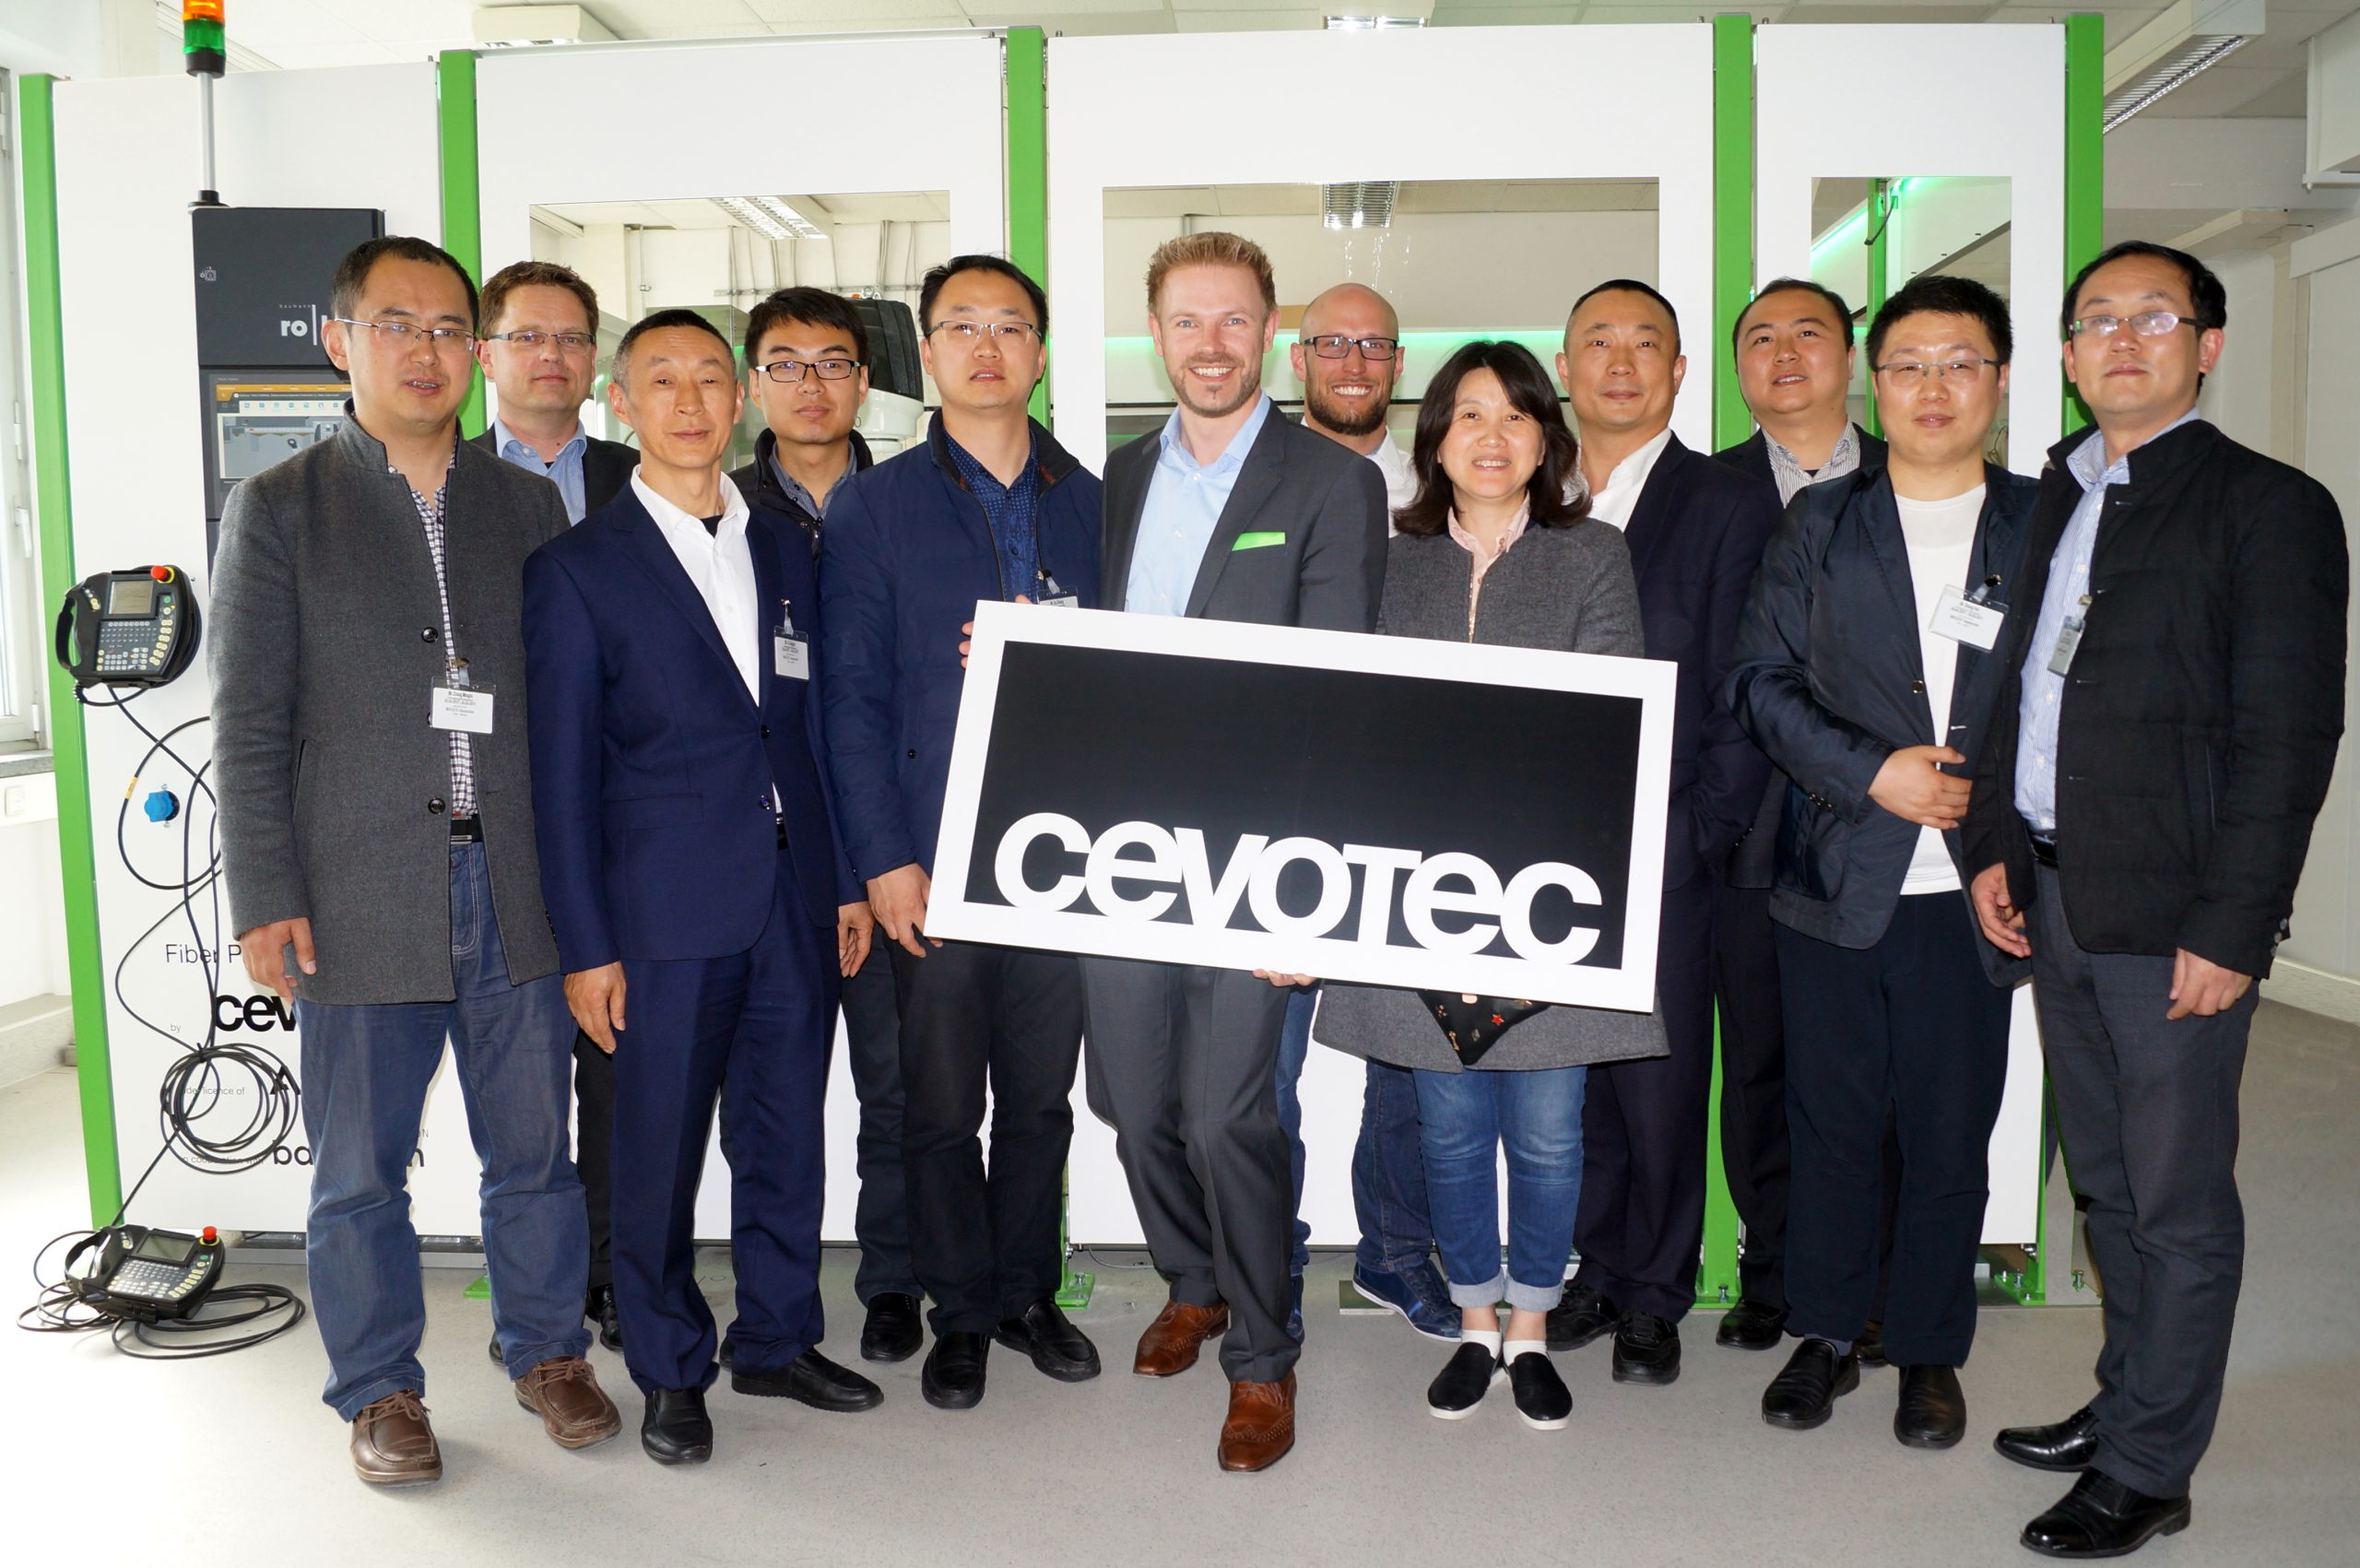 Chinese delegation visits Cevotec and Ludwig Bölkow Campus